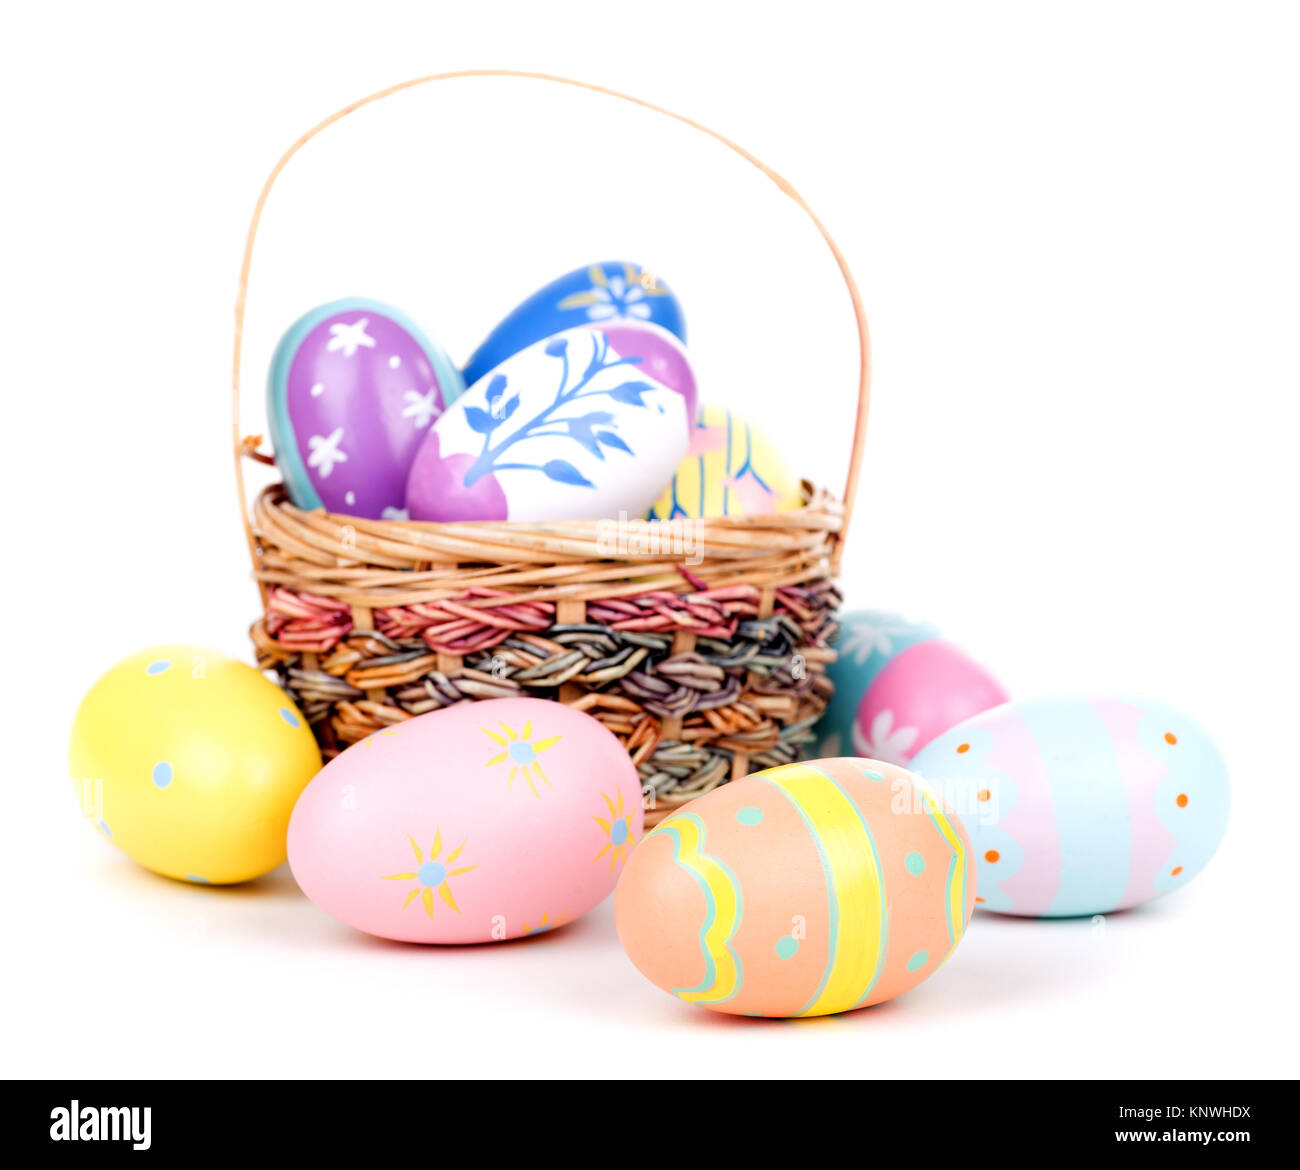 Decorated Easter eggs and basket on a white background Stock Photo